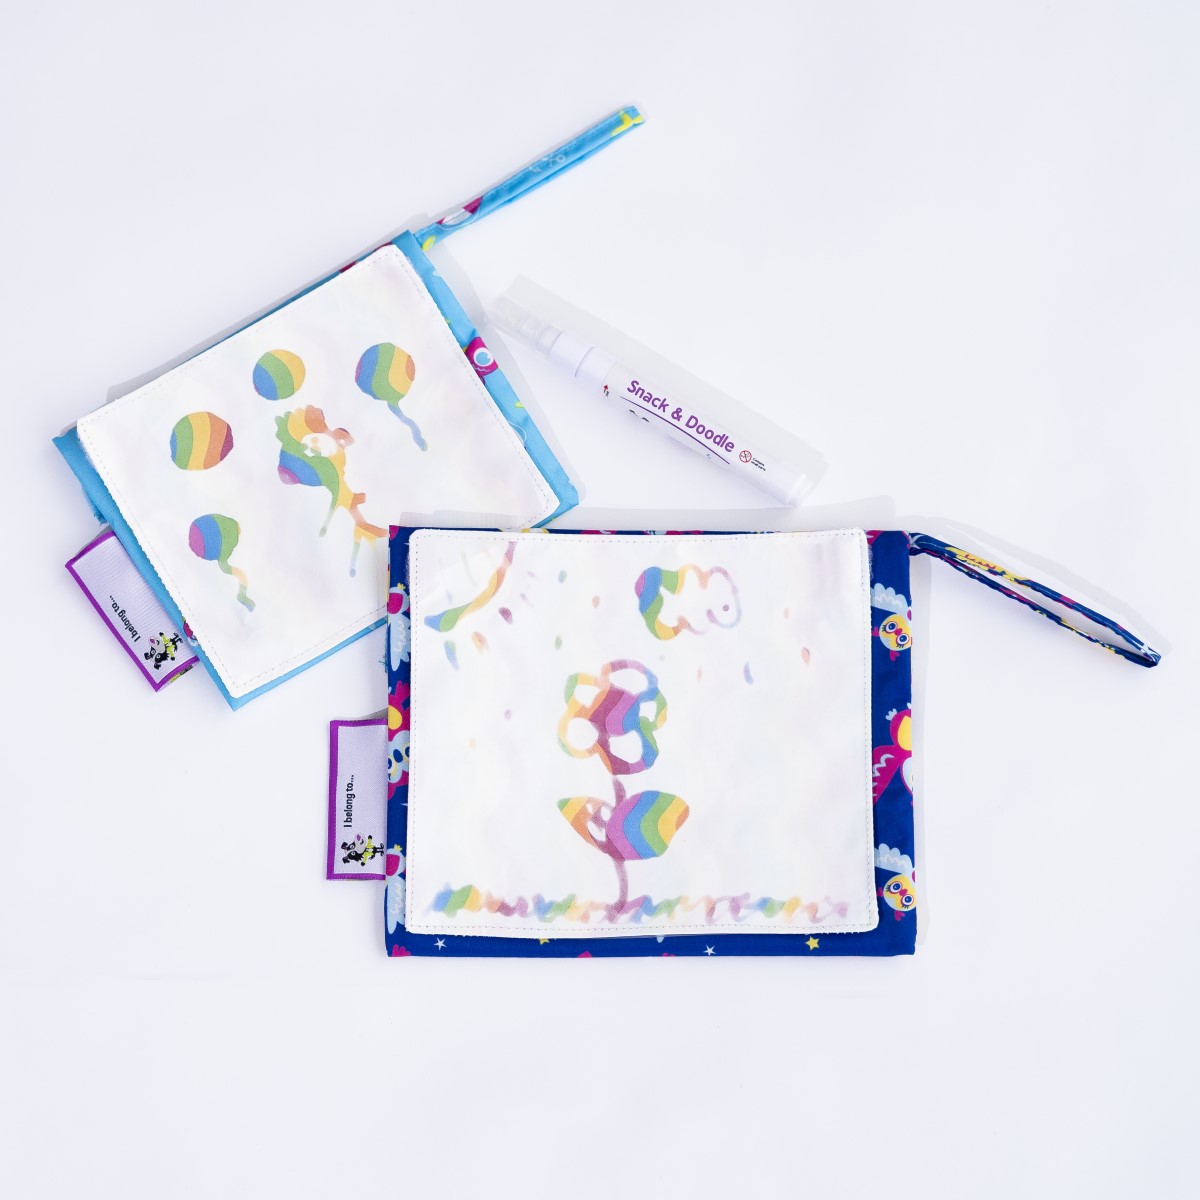 Tidy Tot Snack & Doodle Creative Snack Bags for Snack Time